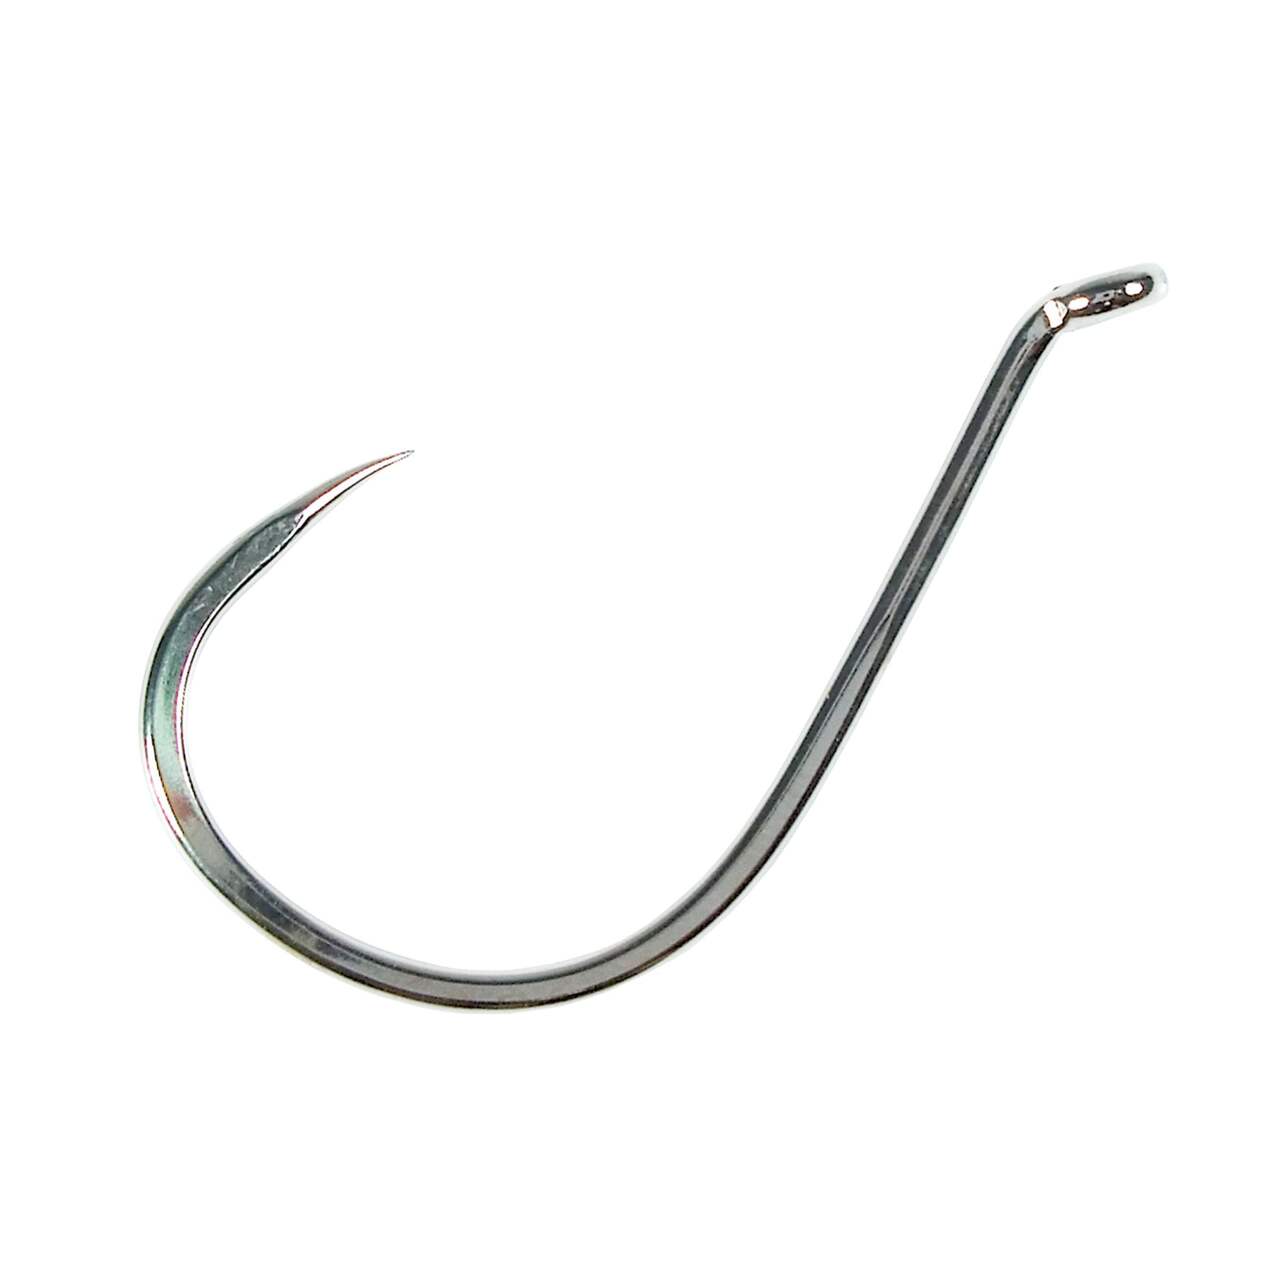 No Touch Easy Catch & Release Rig Fishing Hooks, Stainless Steel, Grip  Tip, Semi Barbless, Offset, Trout, Catfish, Pike, Bass, Panfish, Saltwater, Freshwater, Tackle